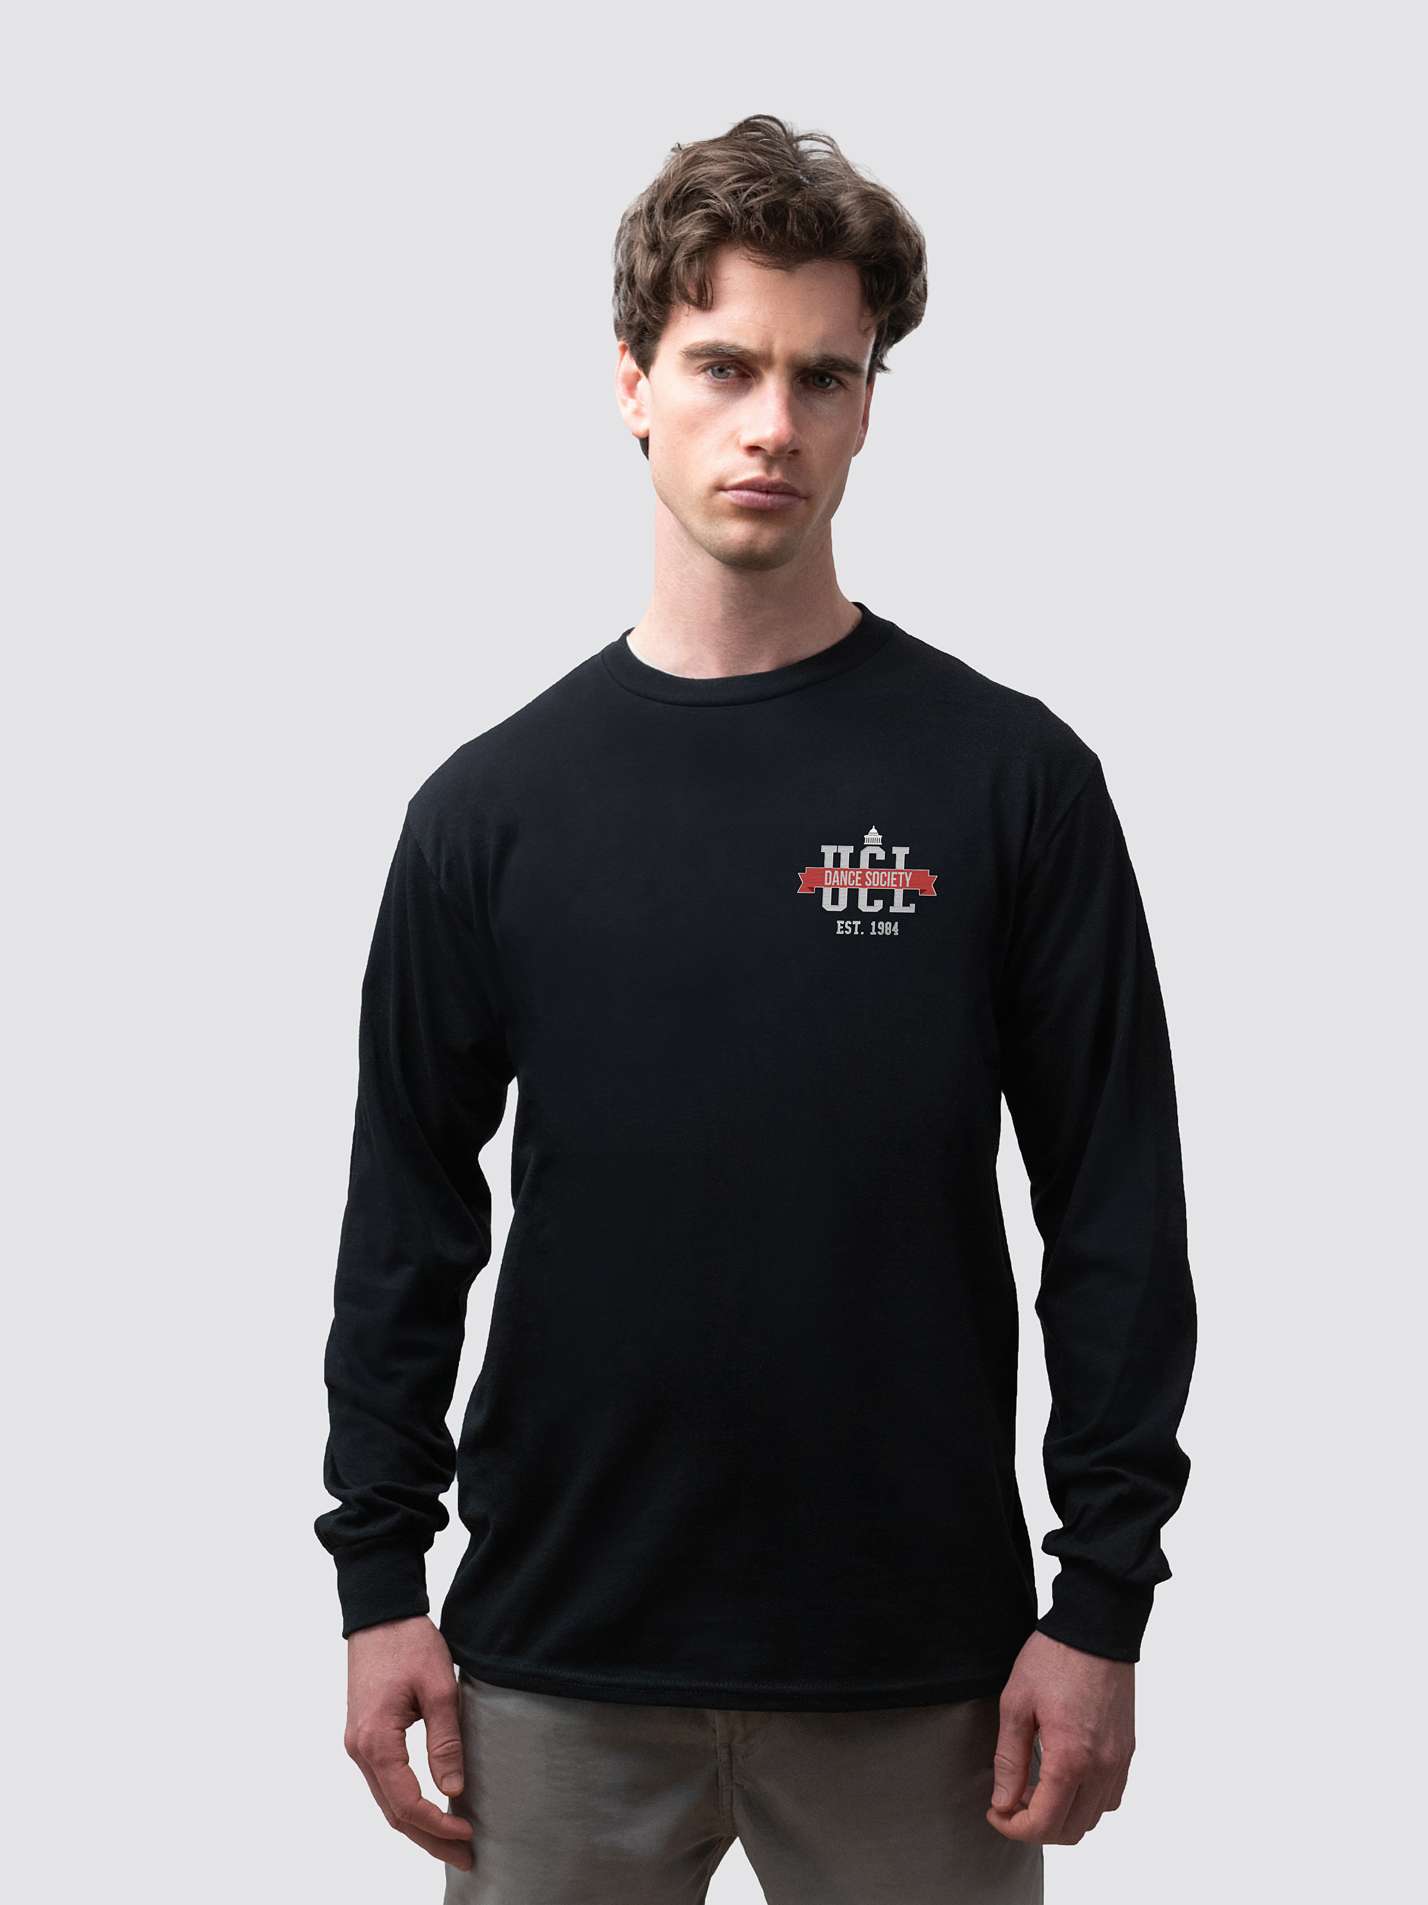 UCL Dance Society Competition Team Unisex Cotton Long Sleeve T-Shirt